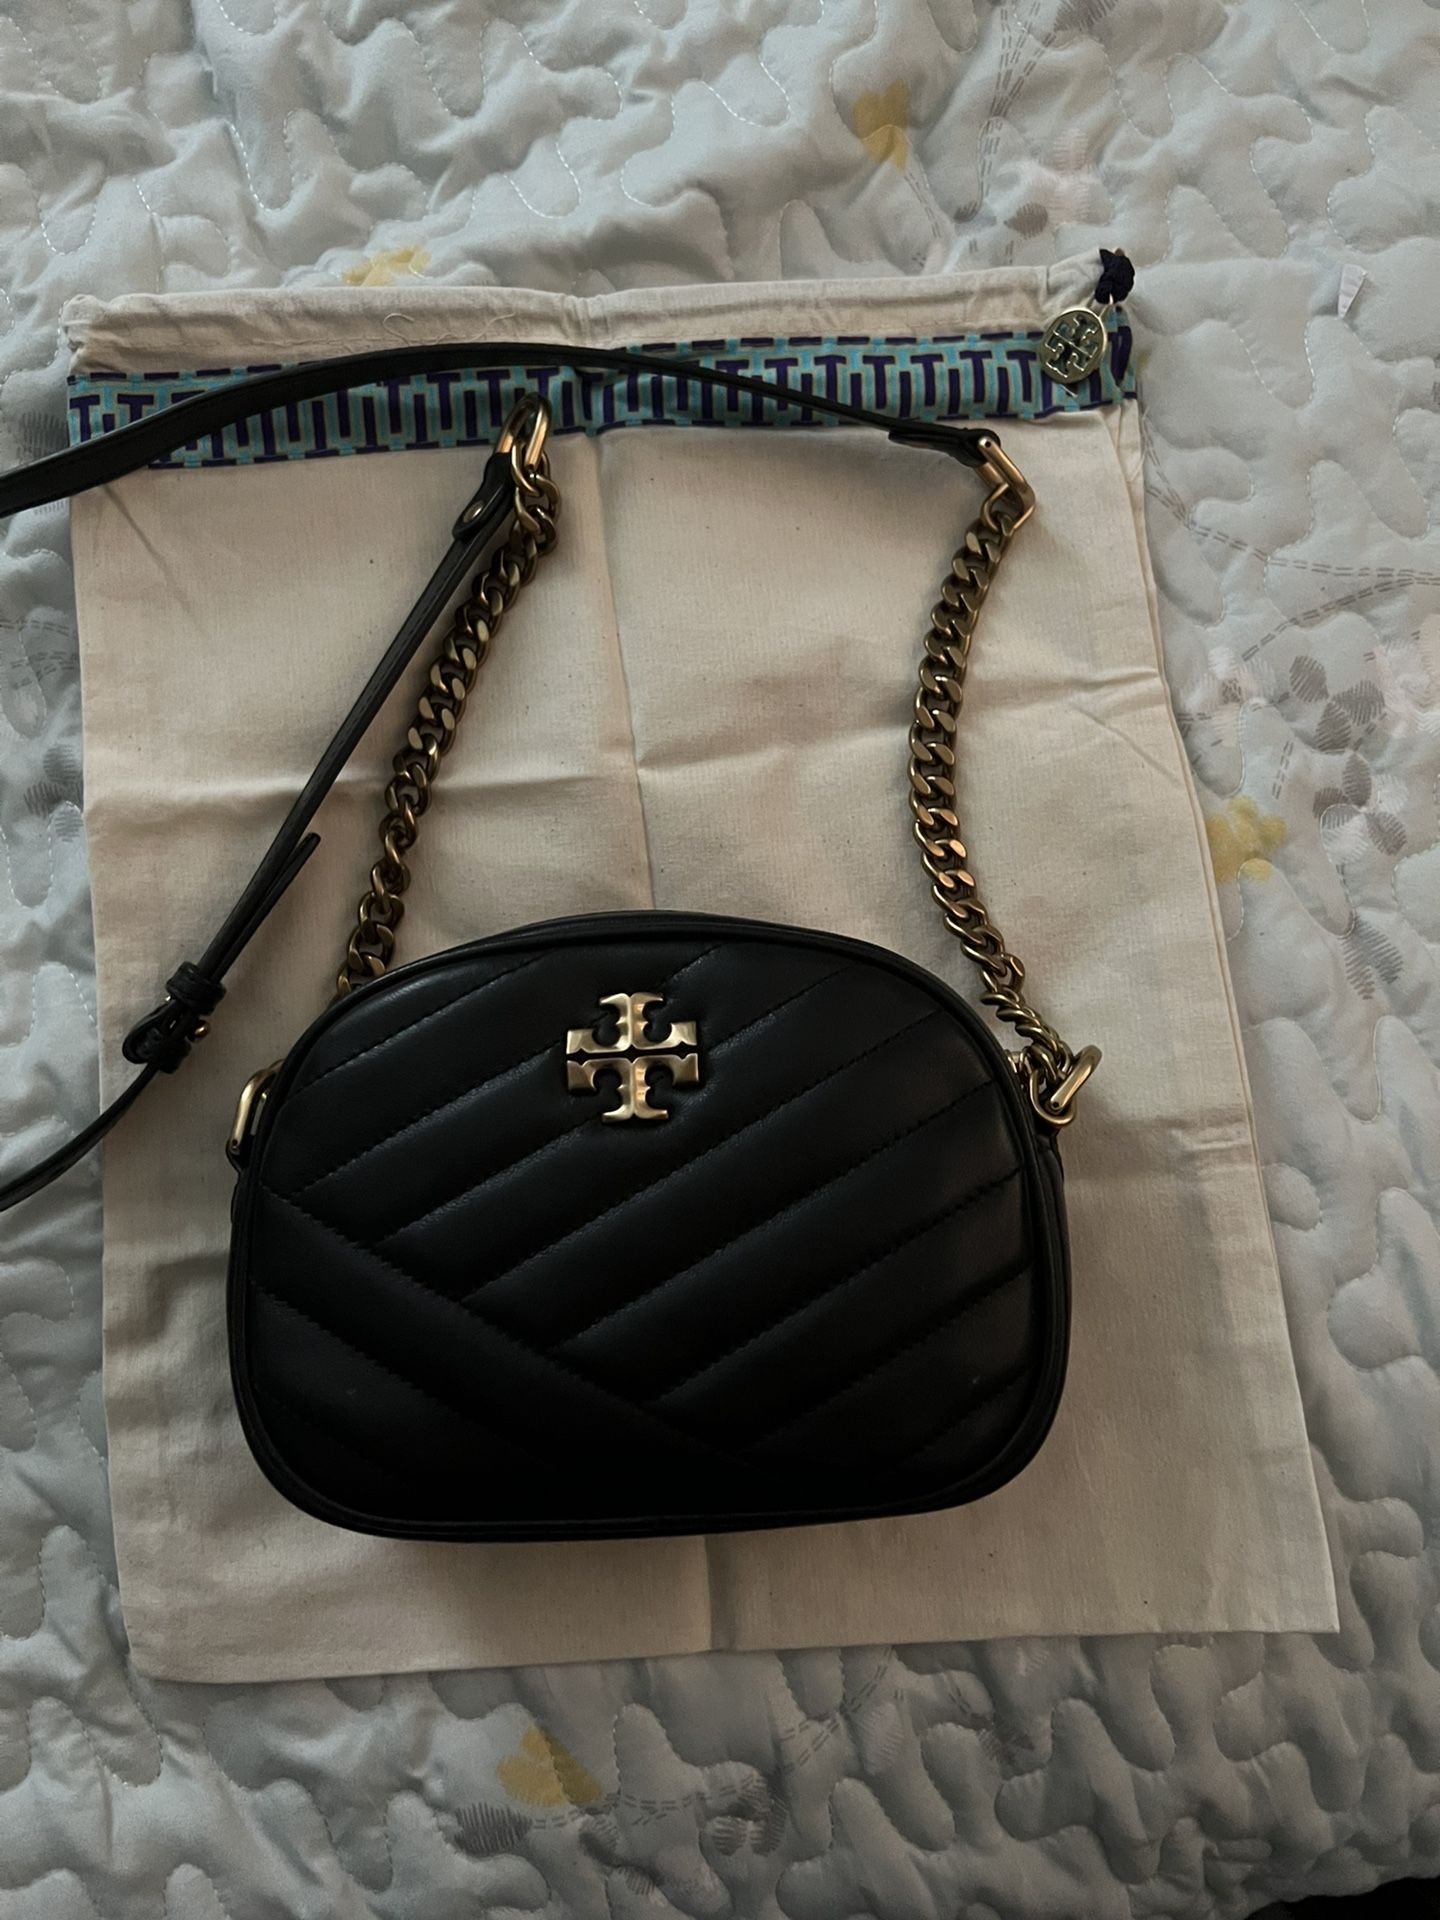 Tory Burch Kira Chevron Small Bag AUTHENTIC for Sale in Cty Of Cmmrce, CA -  OfferUp